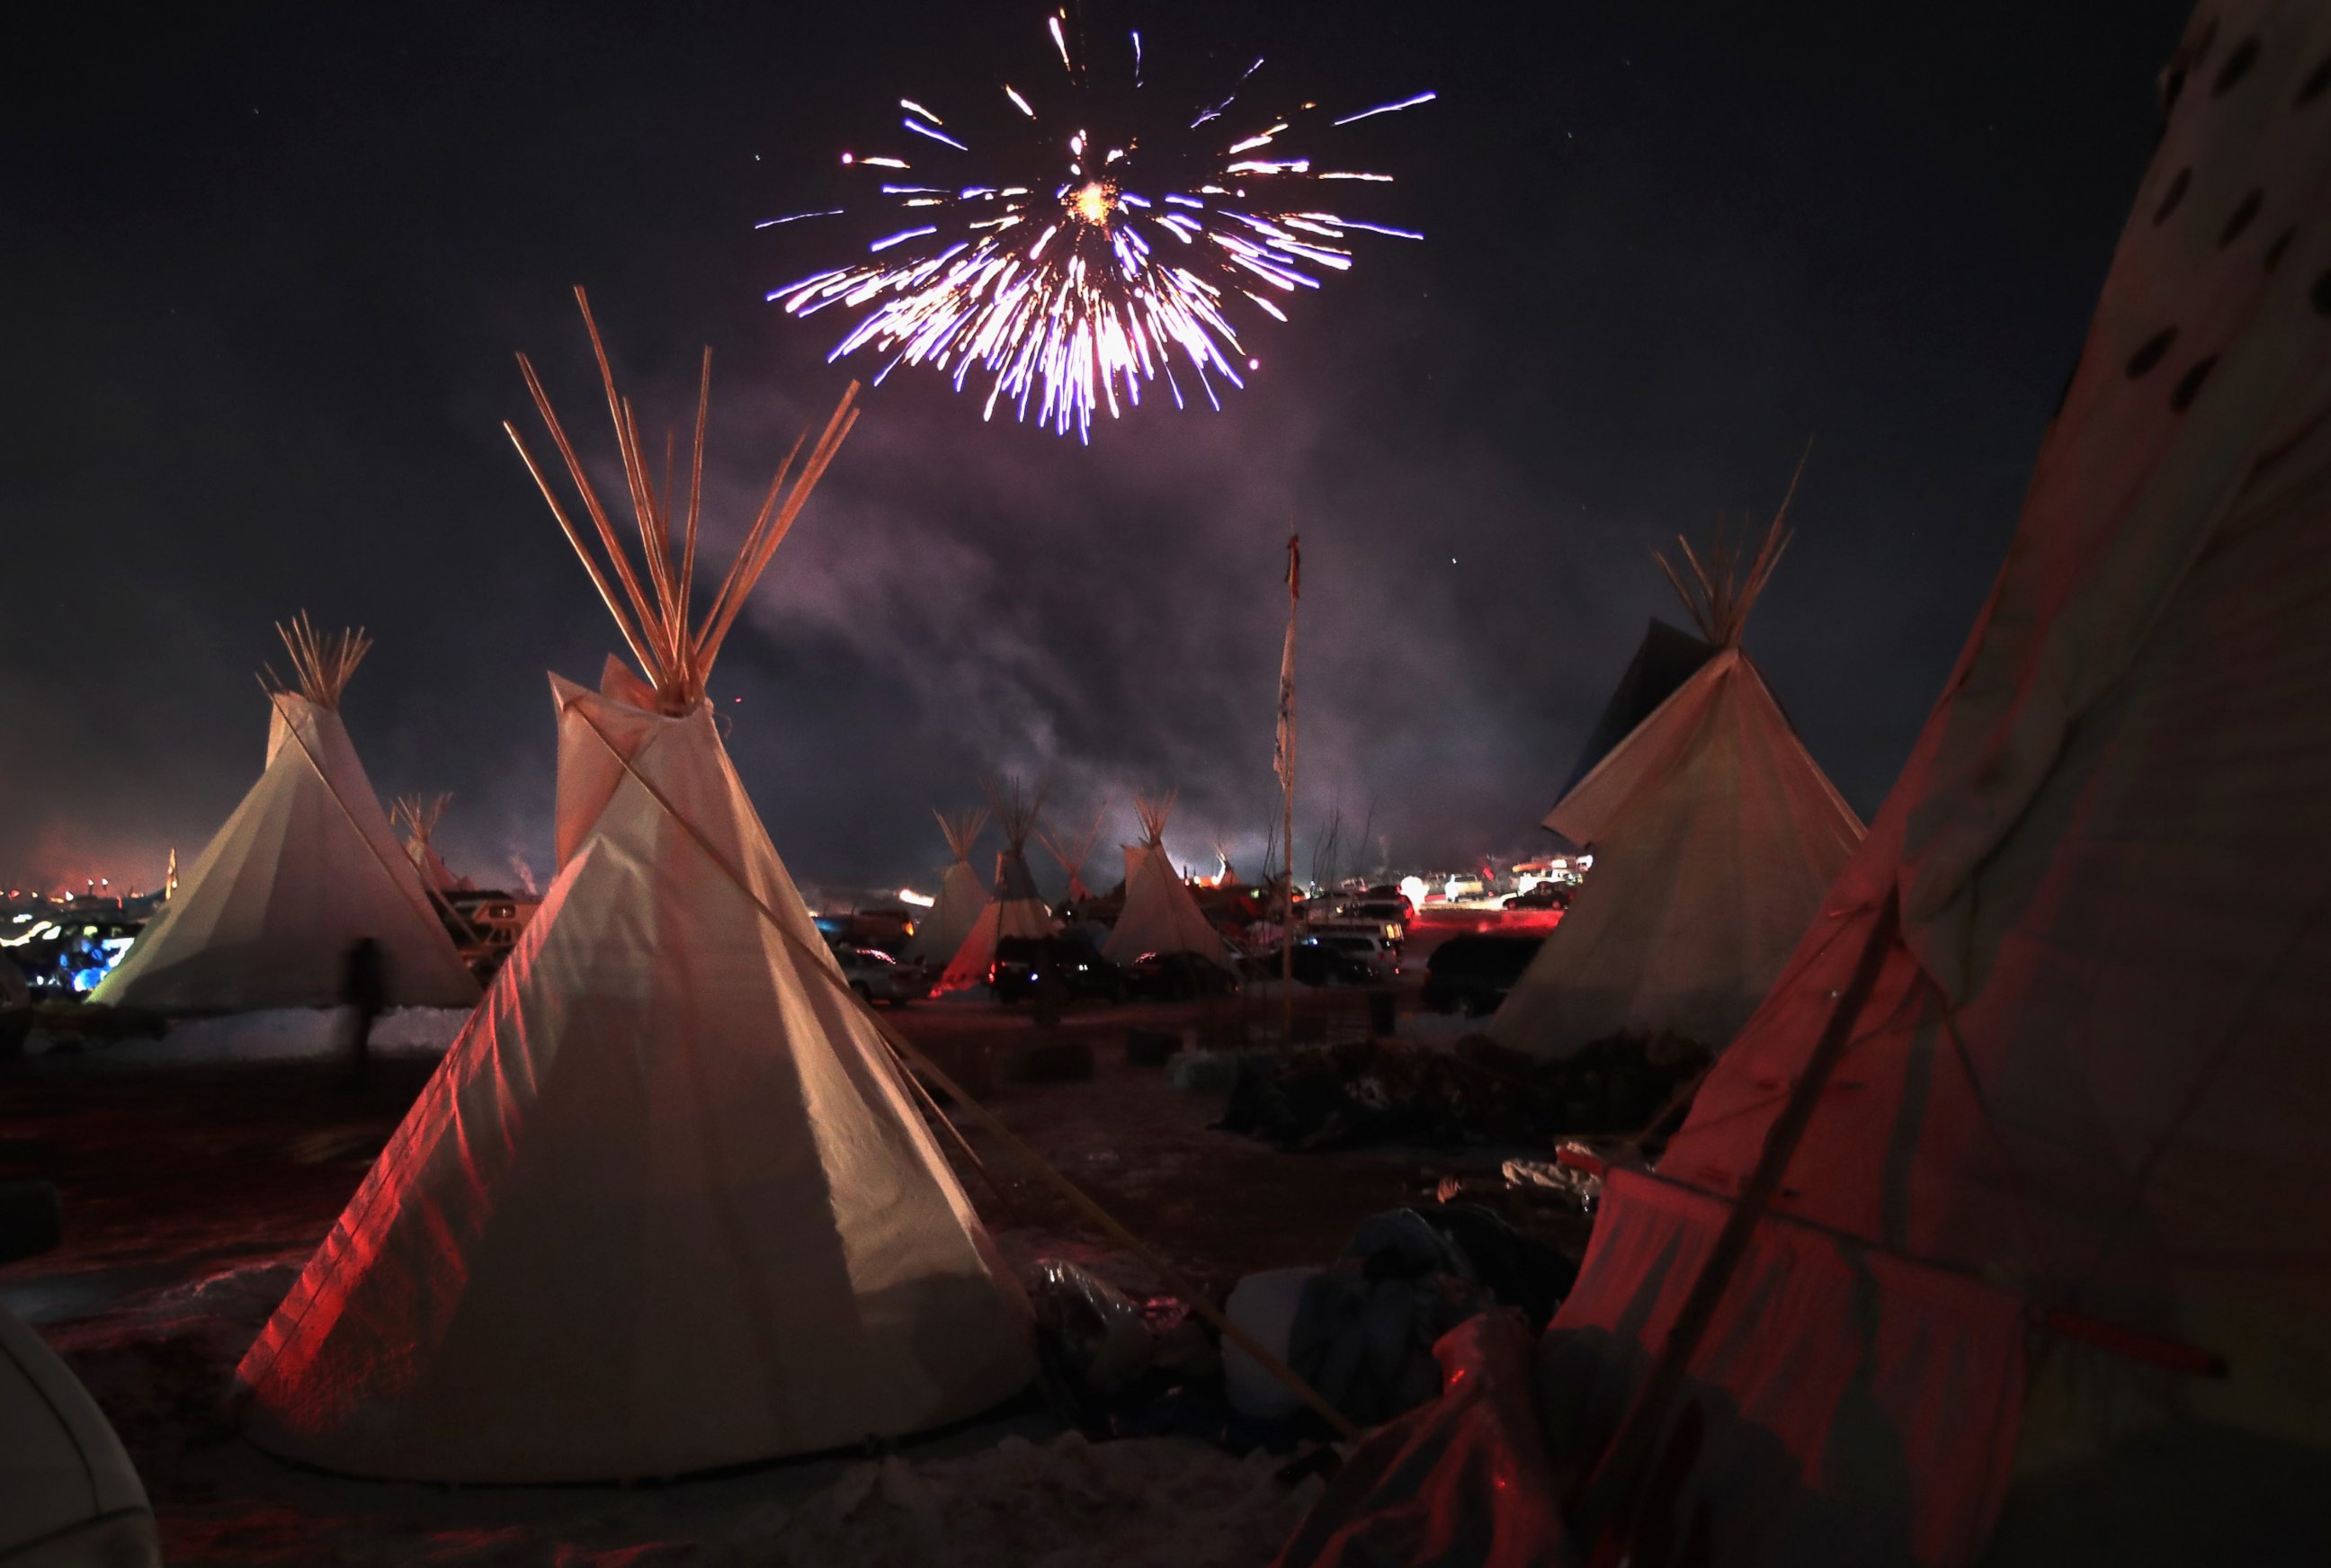 PHOTO: Fireworks fill the sky above Oceti Sakowin Camp as activists celebrate after learning an easement had been denied for the Dakota Access Pipeline near the edge of the Standing Rock Sioux Reservation, Dec. 4, 2016 outside Cannon Ball, North Dakota.